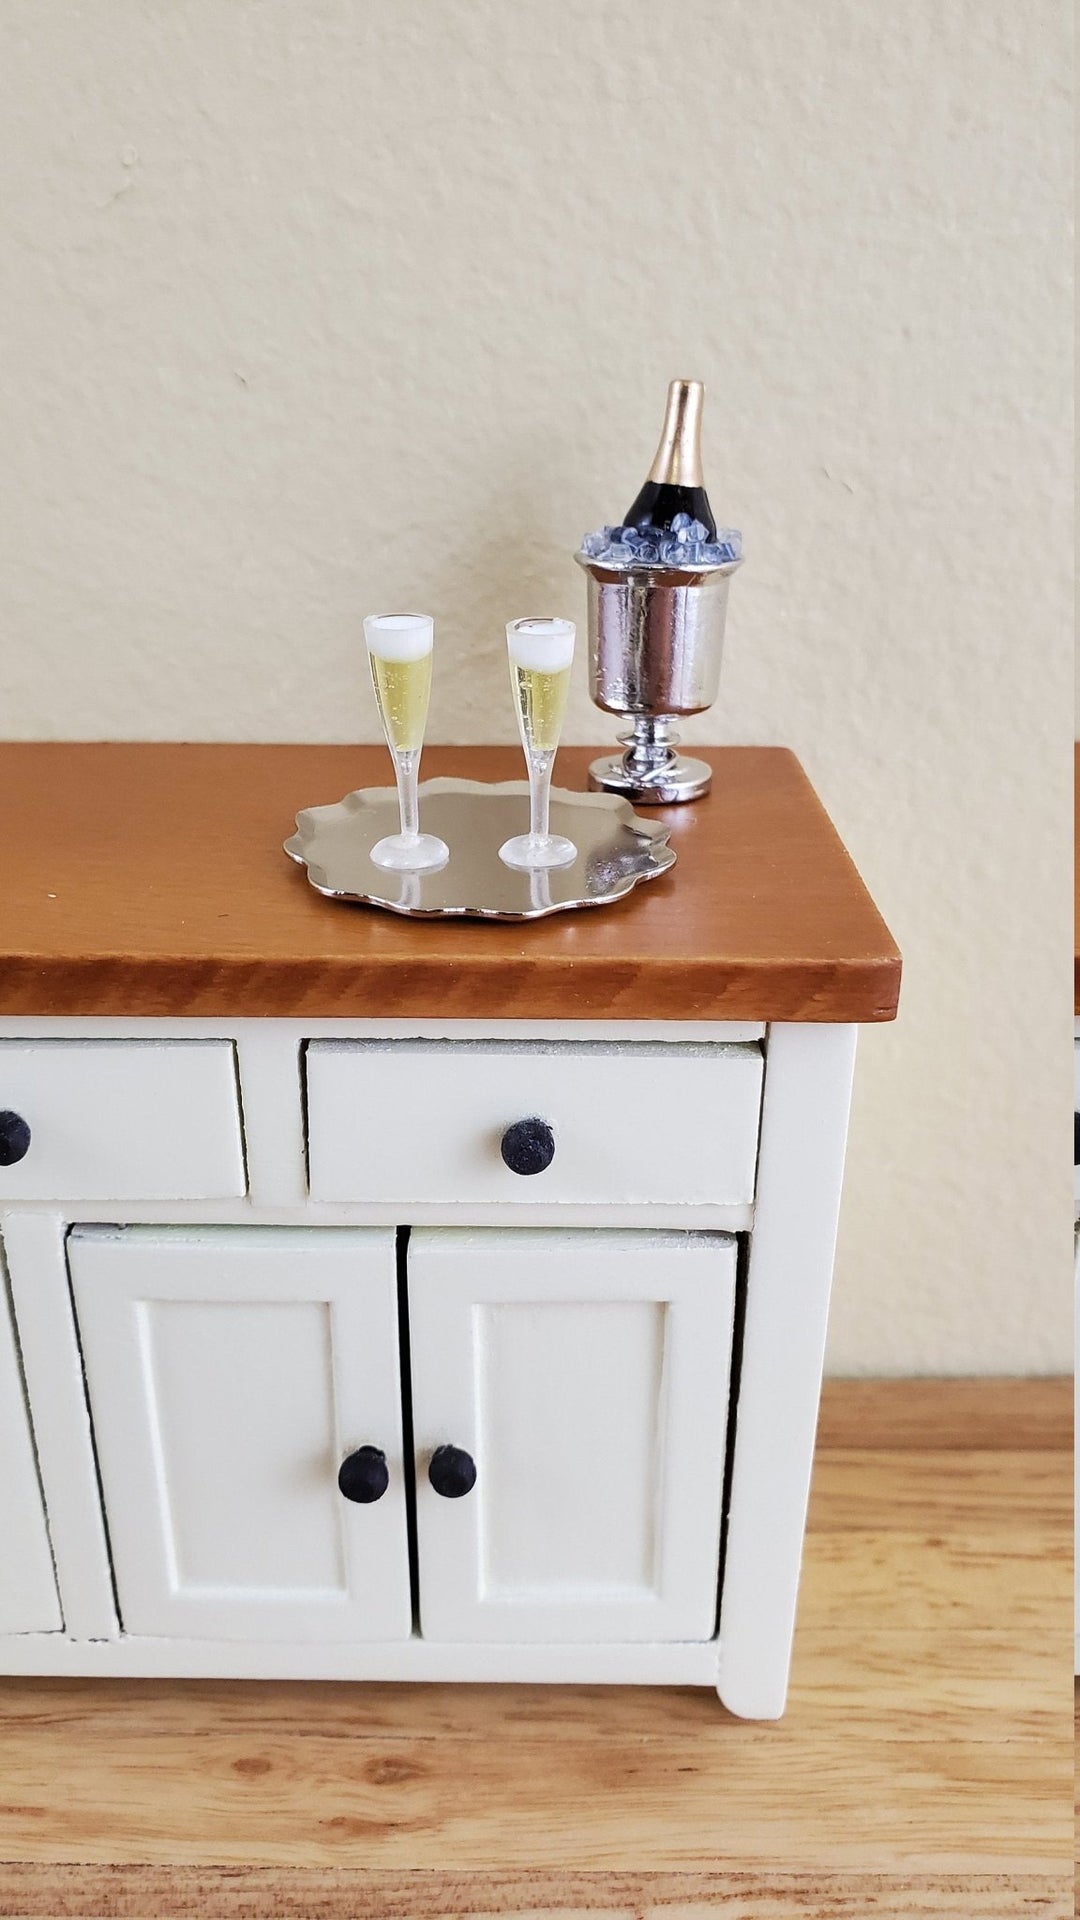 Dollhouse Miniature Champagne on Ice + 2 Filled Glasses Tray1:12 Scale Drinks - Miniature Crush